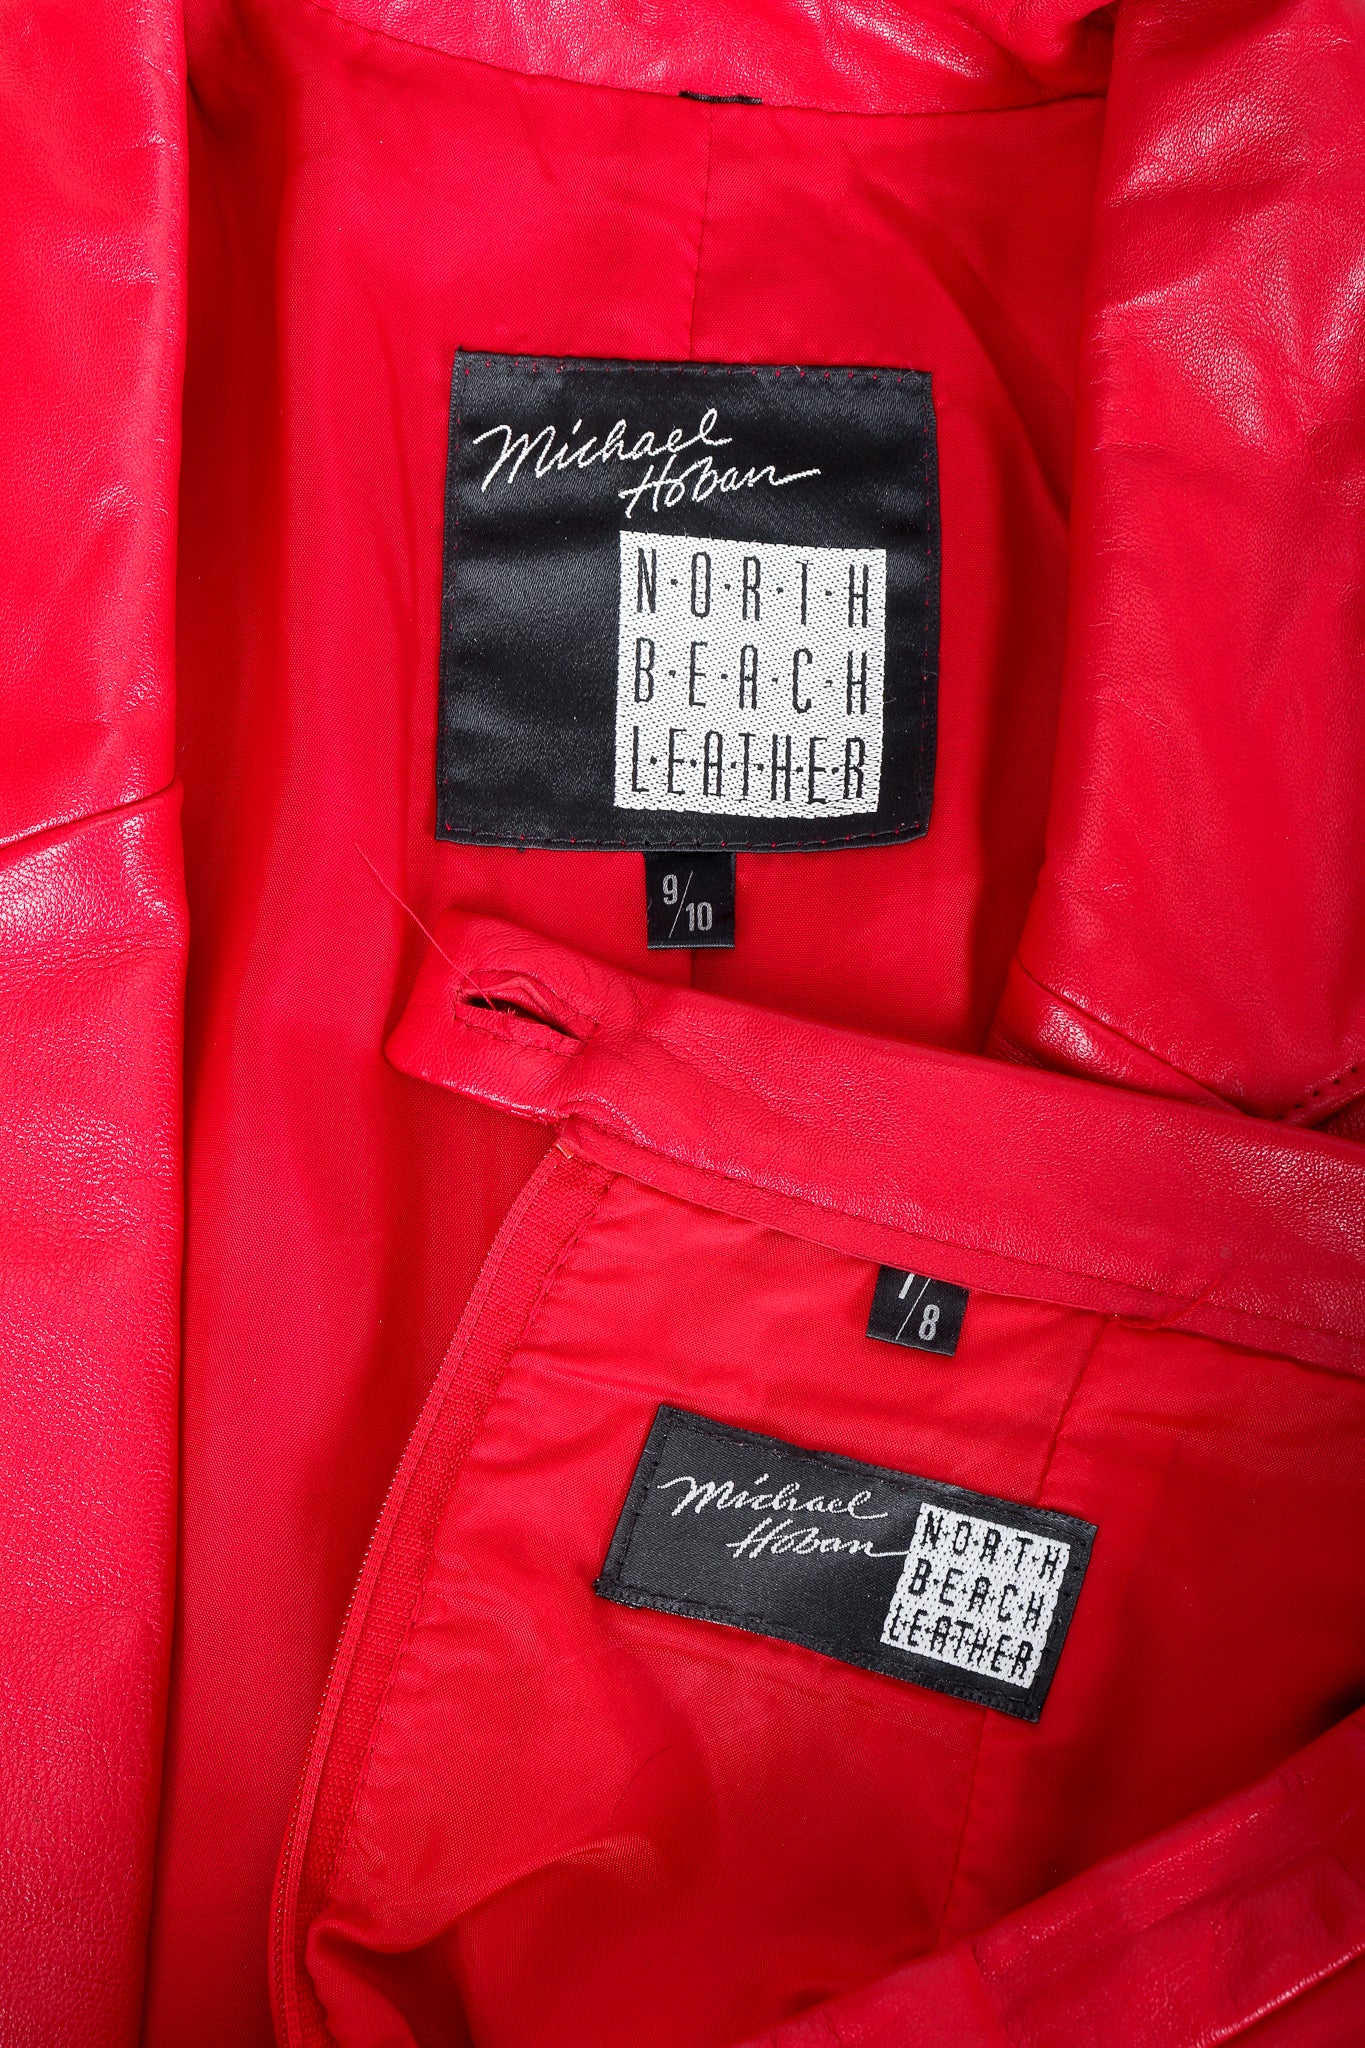 Vintage North Beach Leather by Michael Hoban Labels on red leather